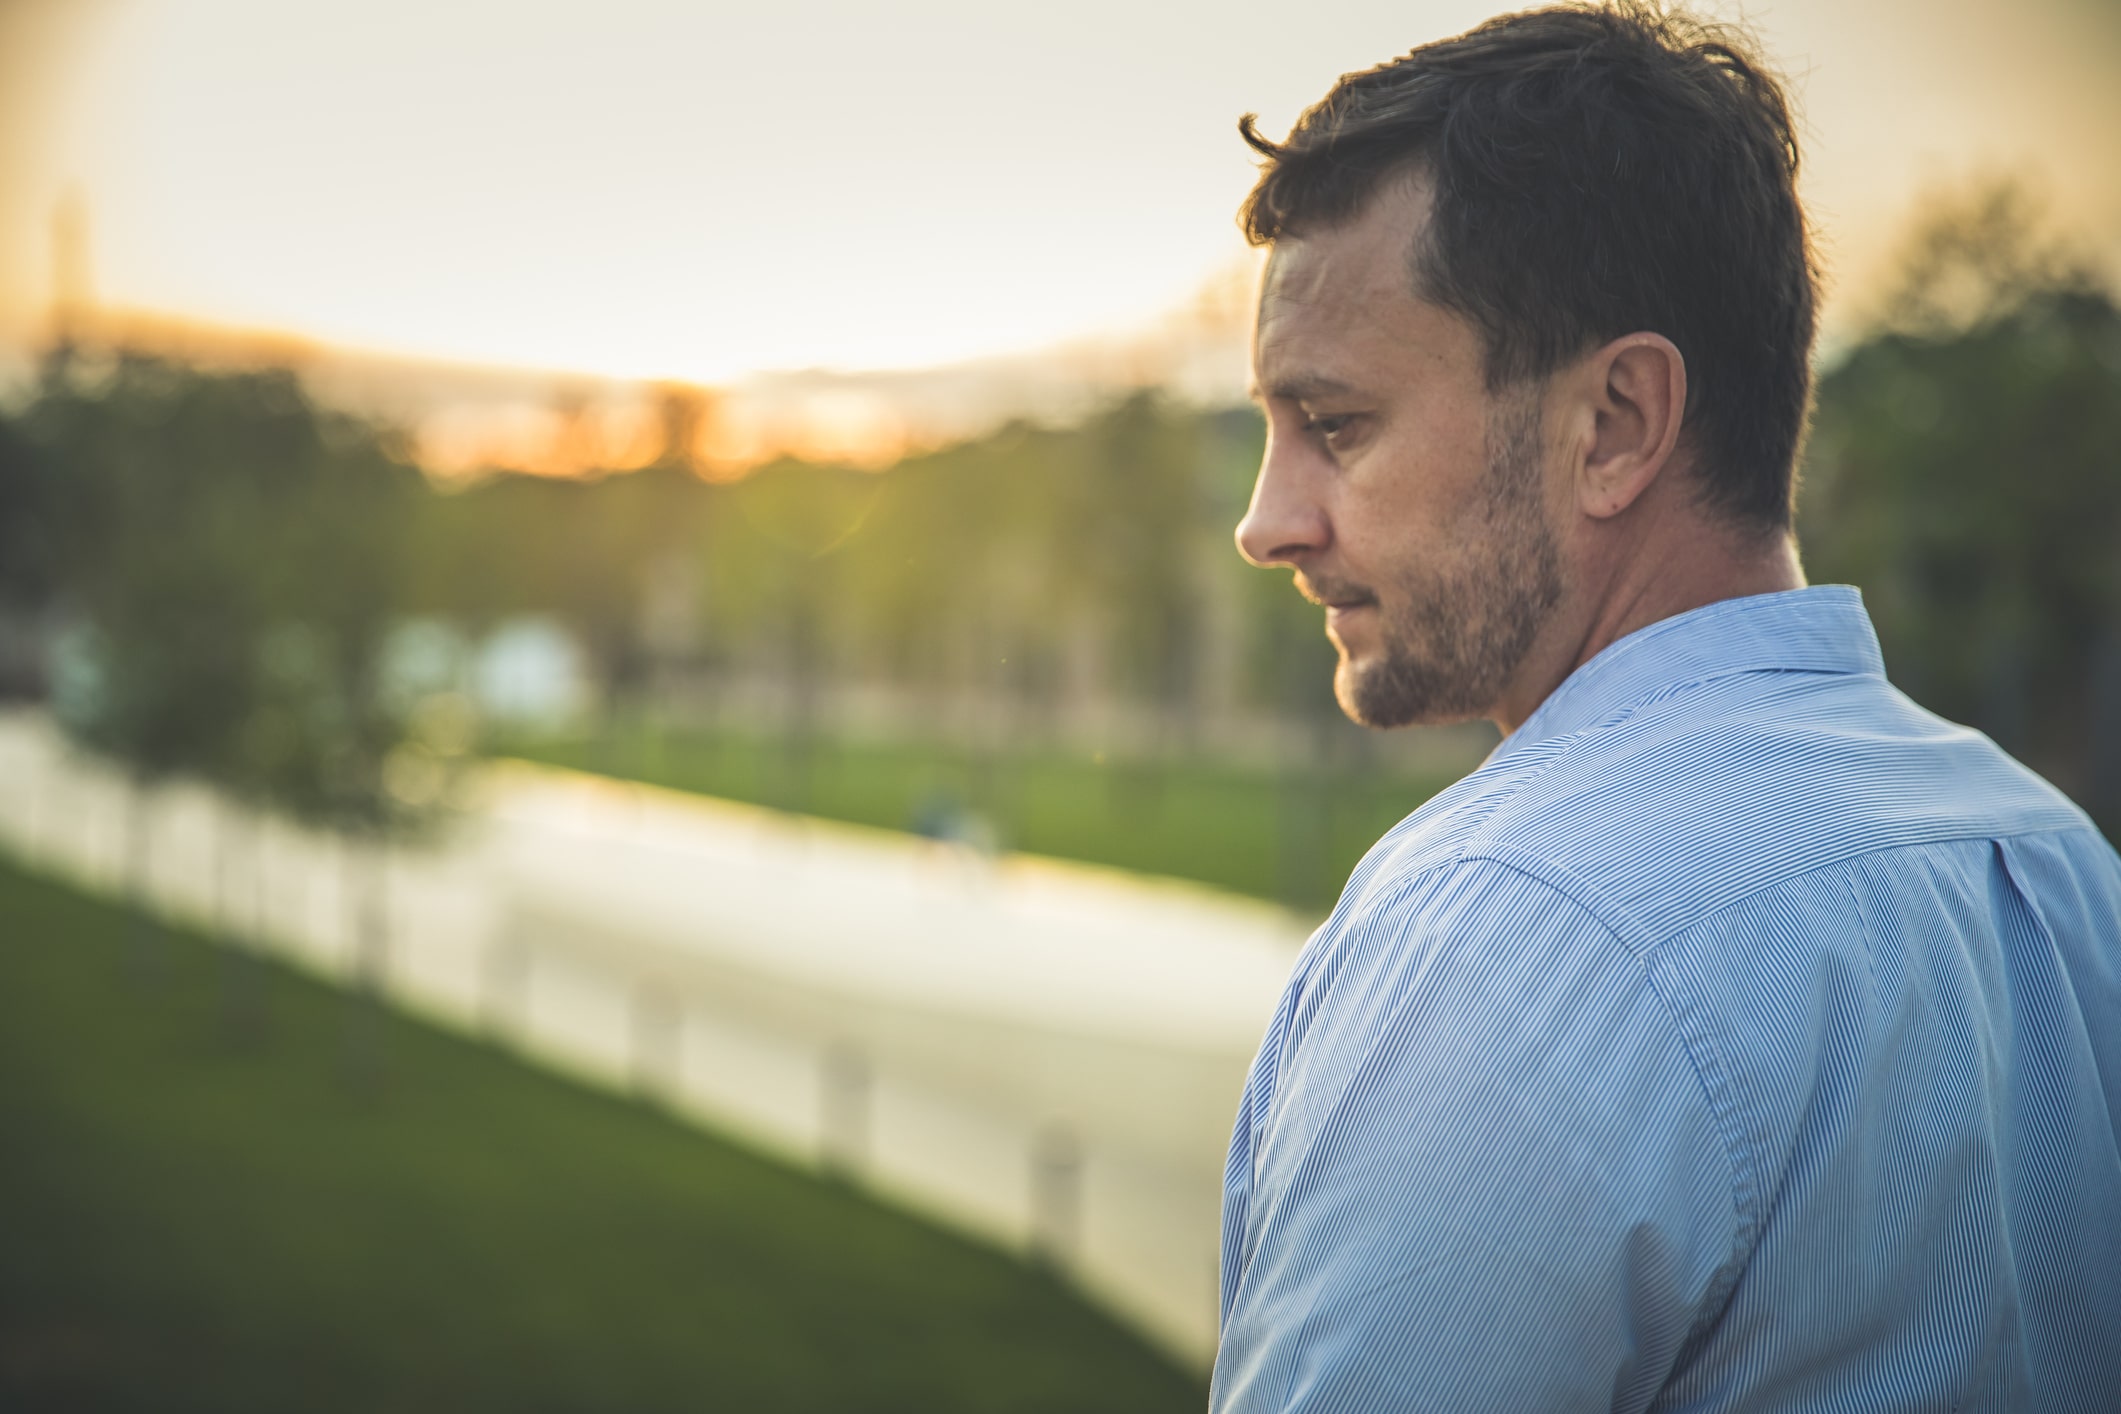 Man in blue collared shirt pondering near a pathway at sunset